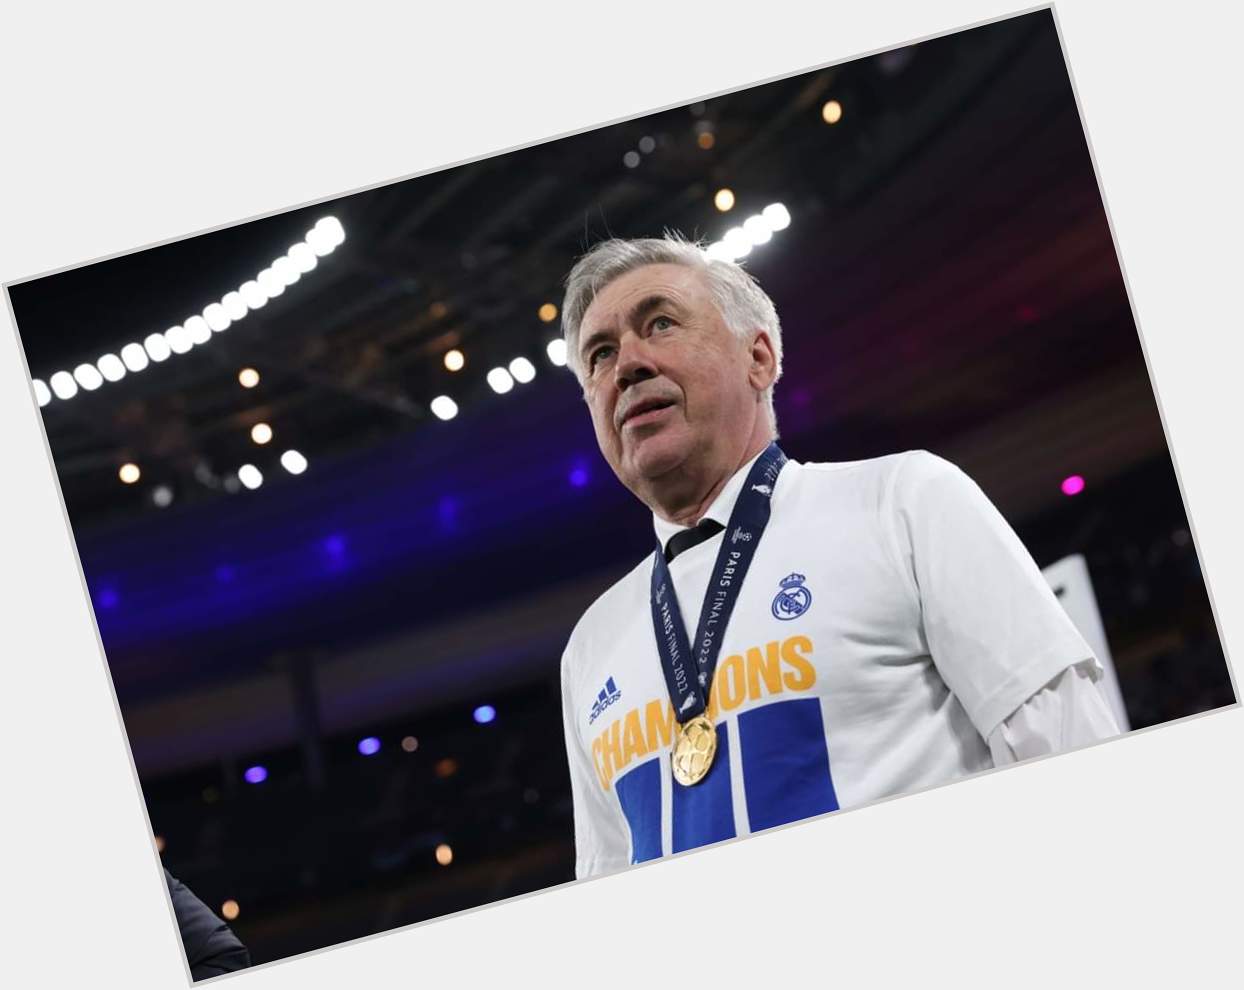 A big happy birthday to mister Carlo Ancelotti who turns 63 today!  